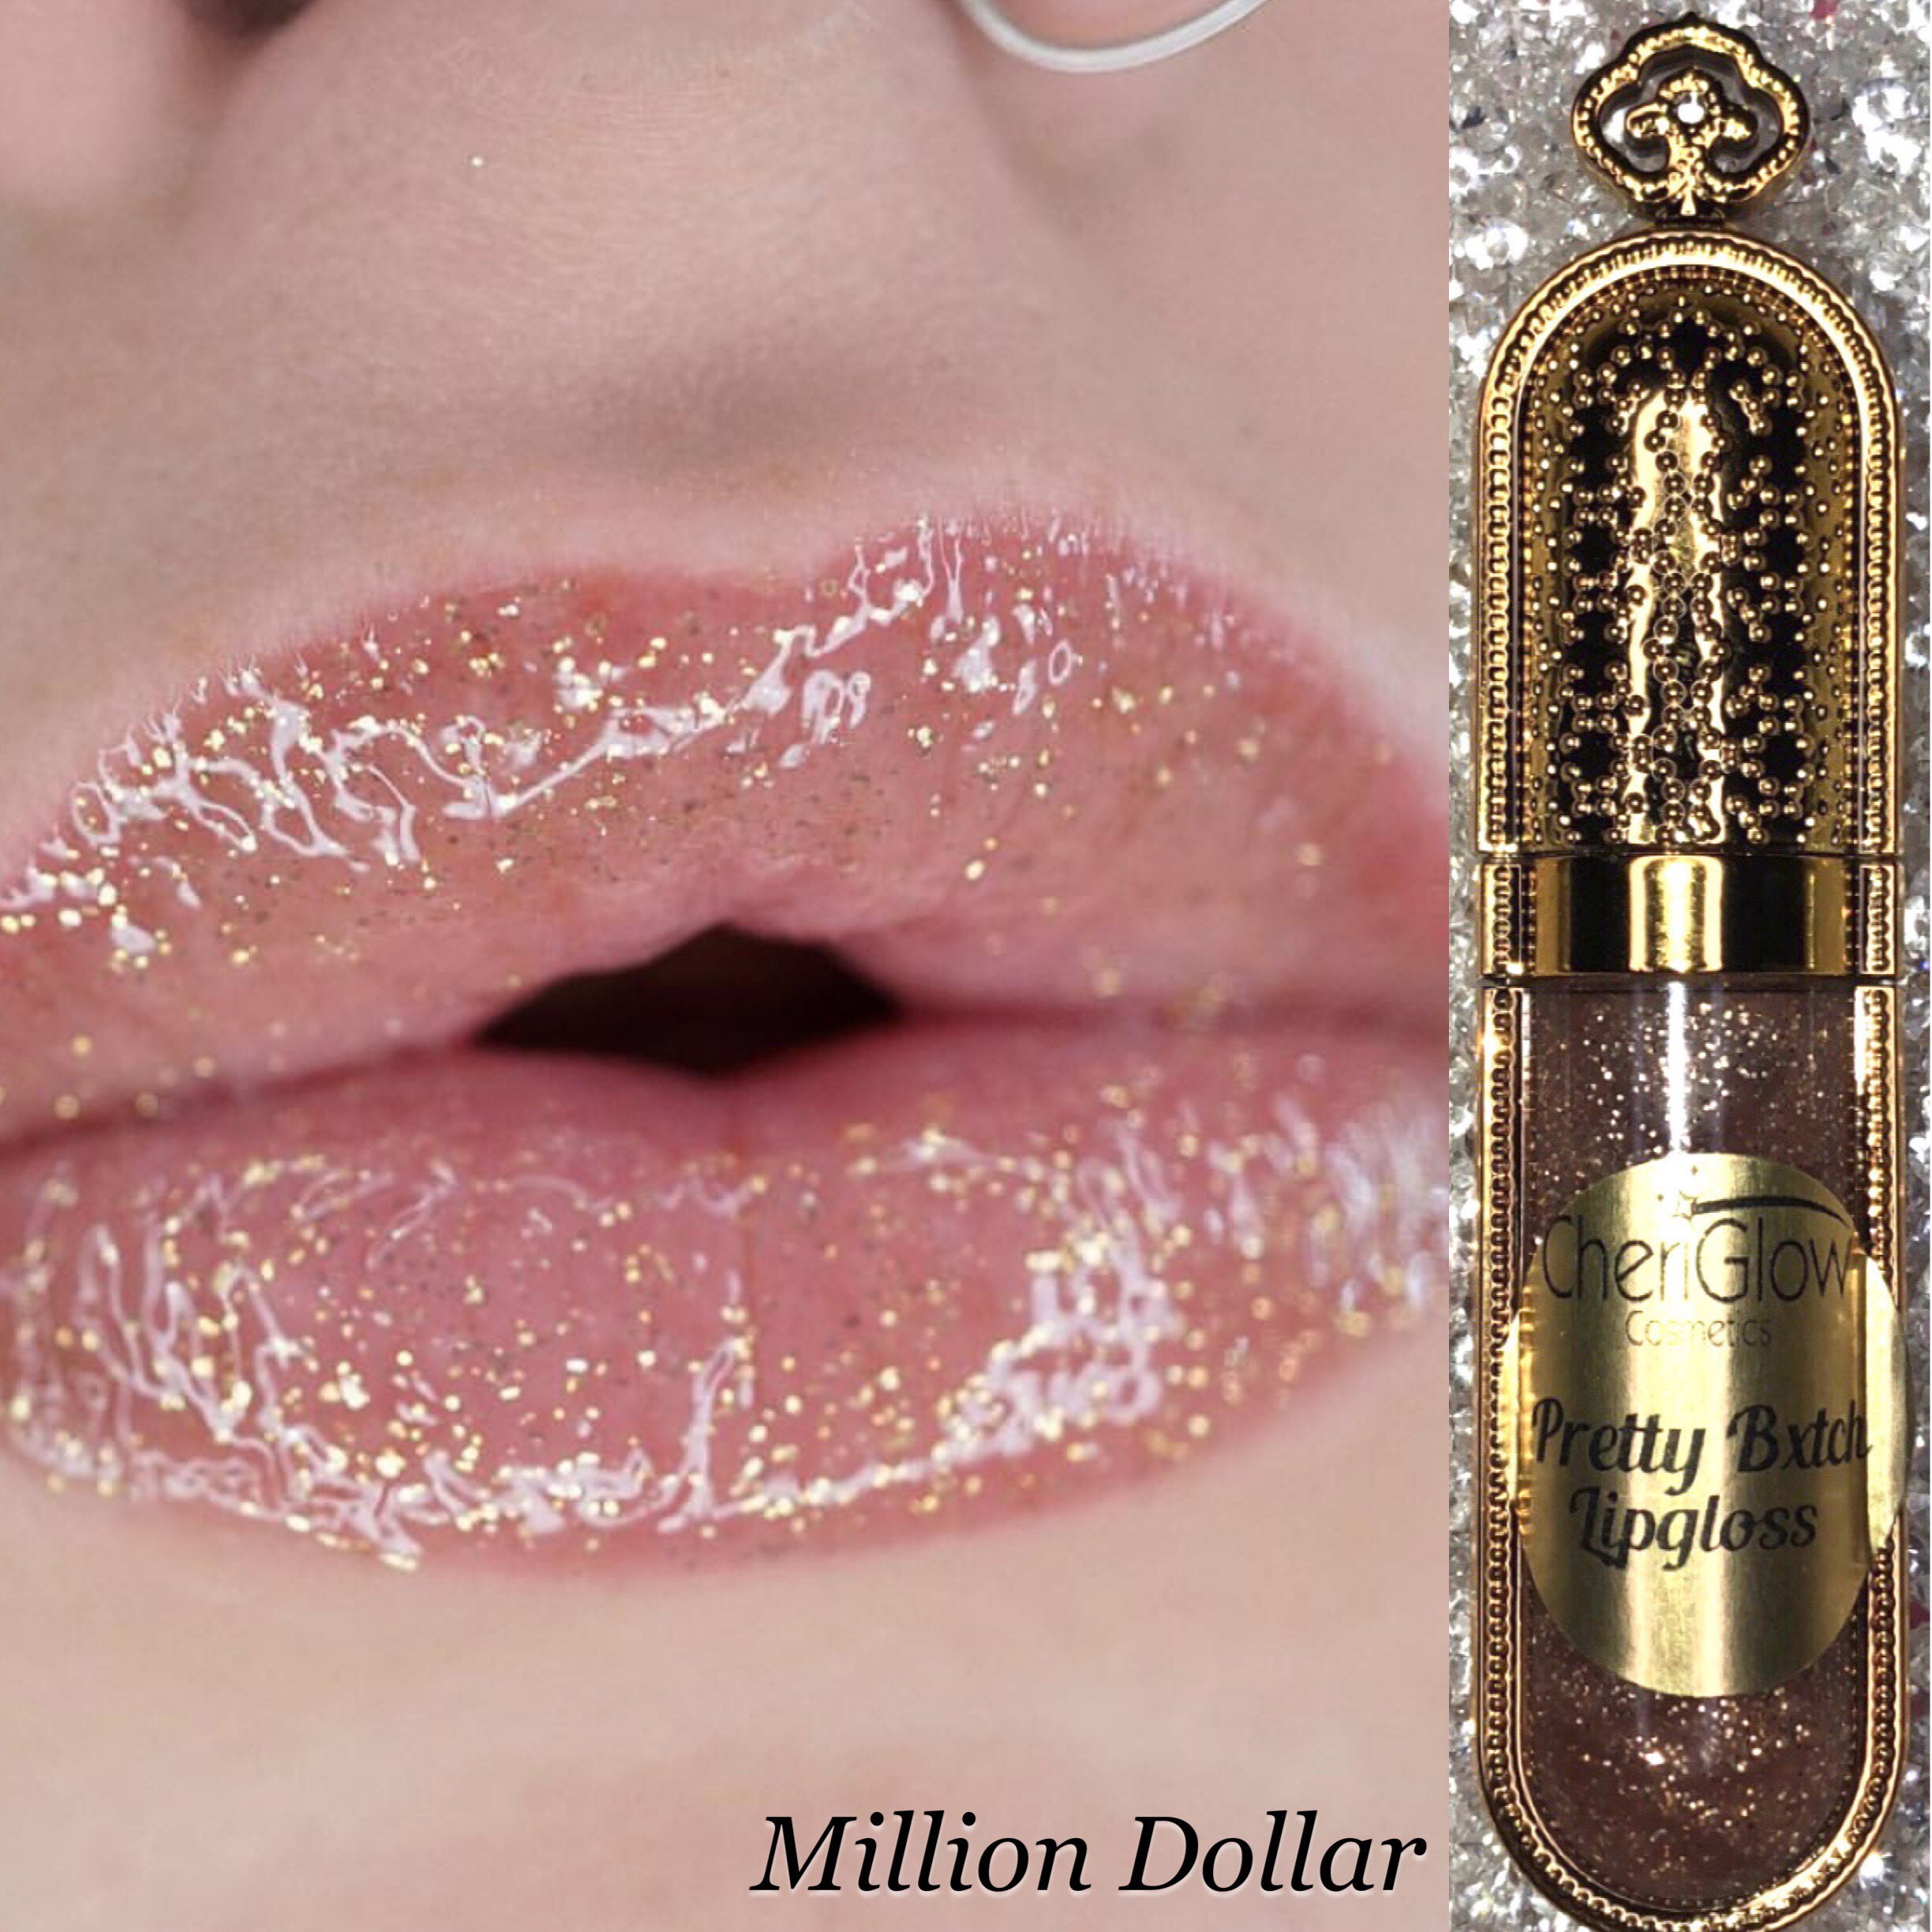 The Best In Gold Lip Gloss - Into The Gloss